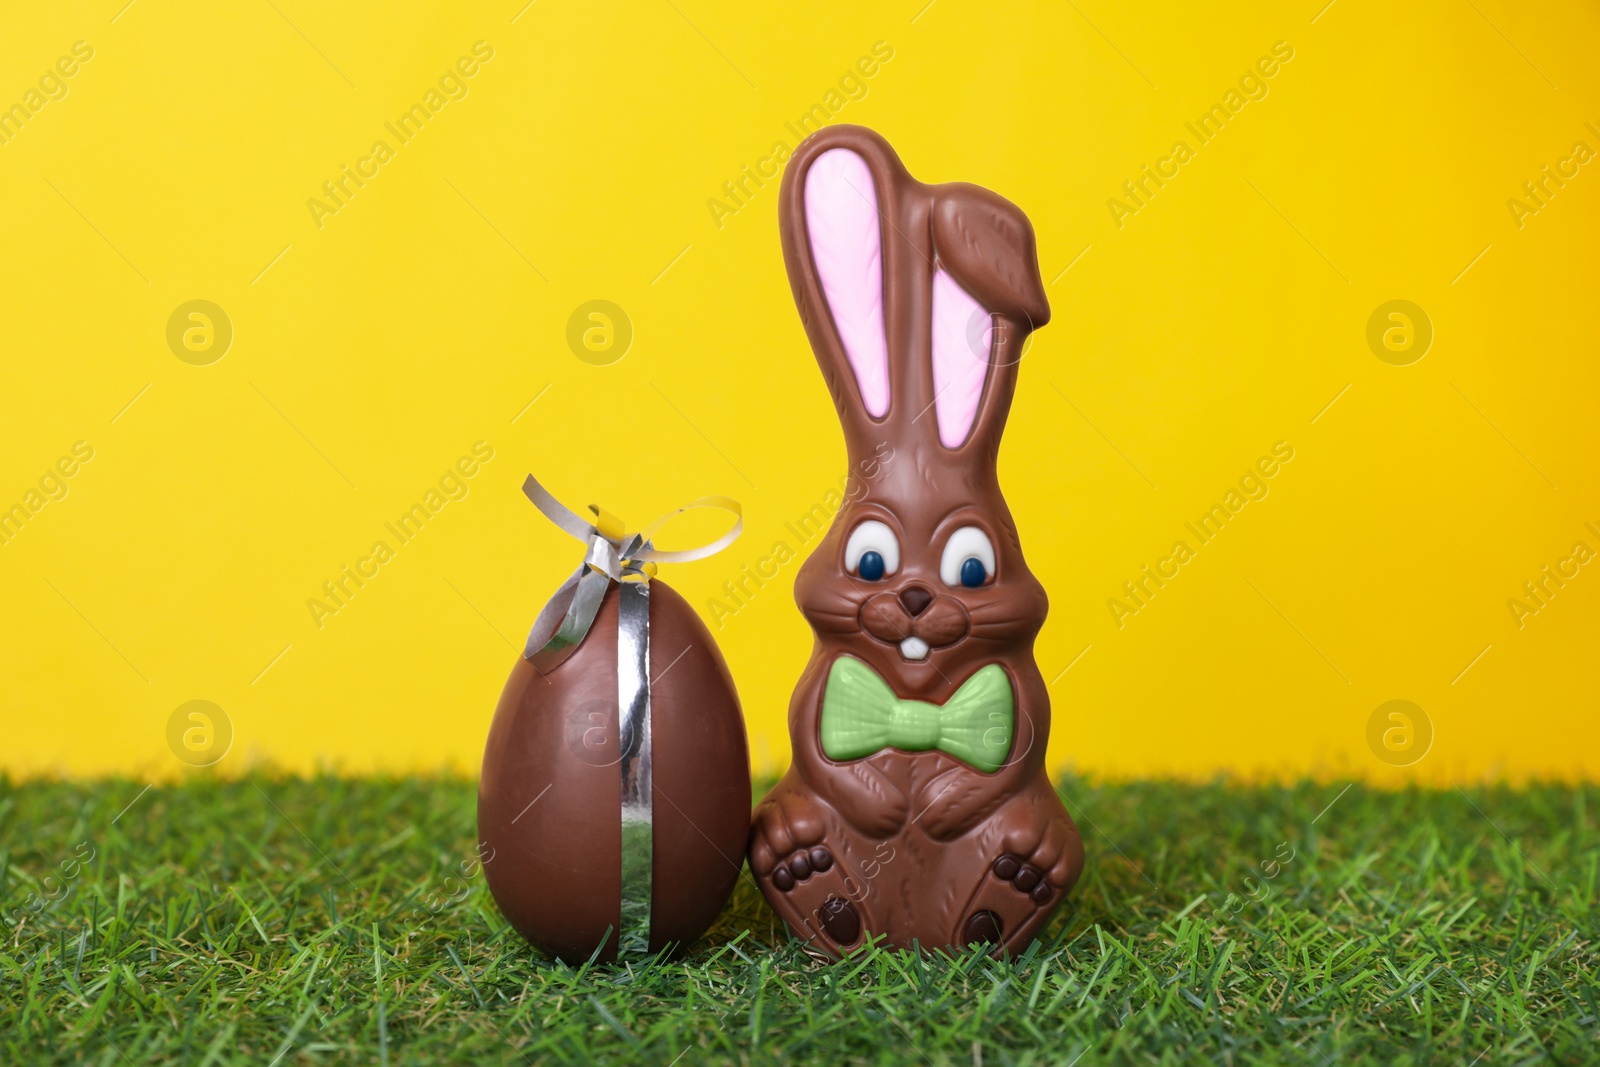 Photo of Easter celebration. Cute chocolate bunny and egg on grass against yellow background